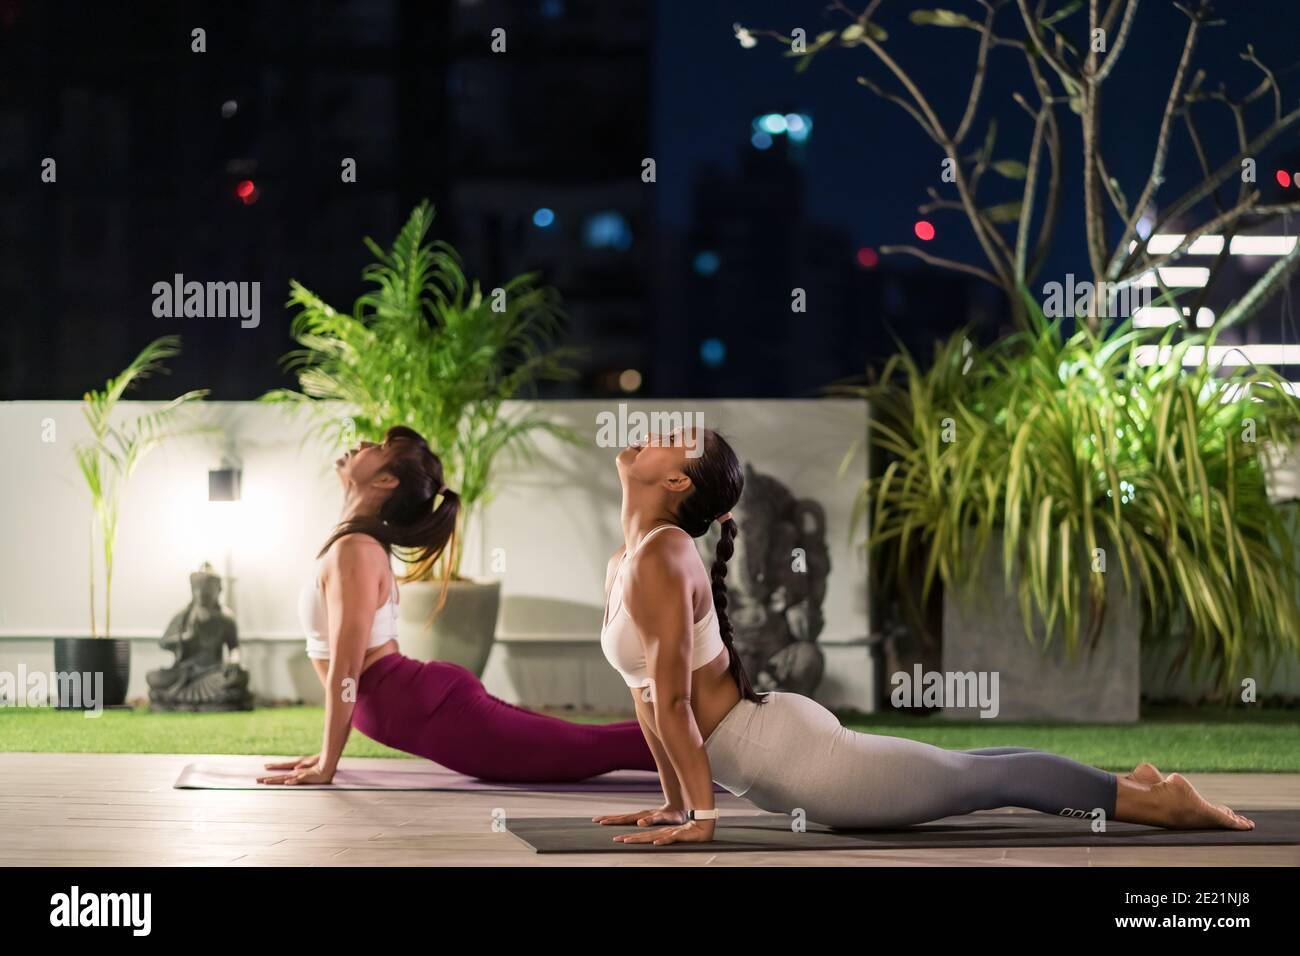 Two asian women in sportswear pants practicing yoga during city lockdown in their apratment with distance in background of cityscape illumination at n Stock Photo